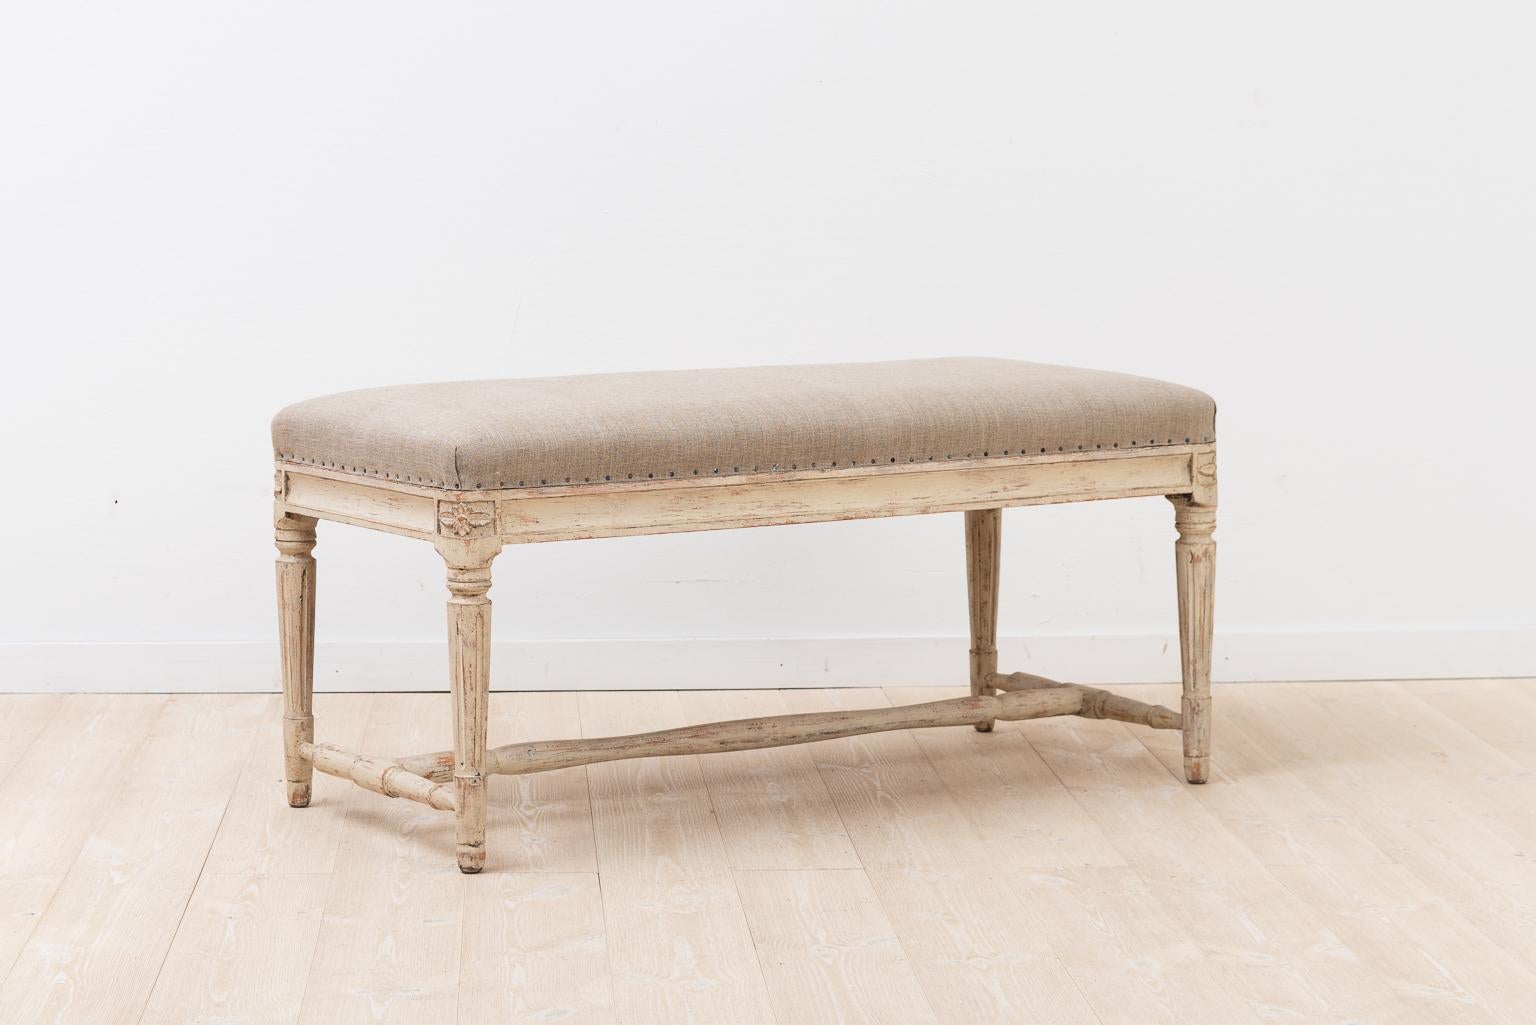 Bench in Gustavian style. The seat has been reupholstered with linen fabric.
Manufactured during the late 1800s in Sweden.